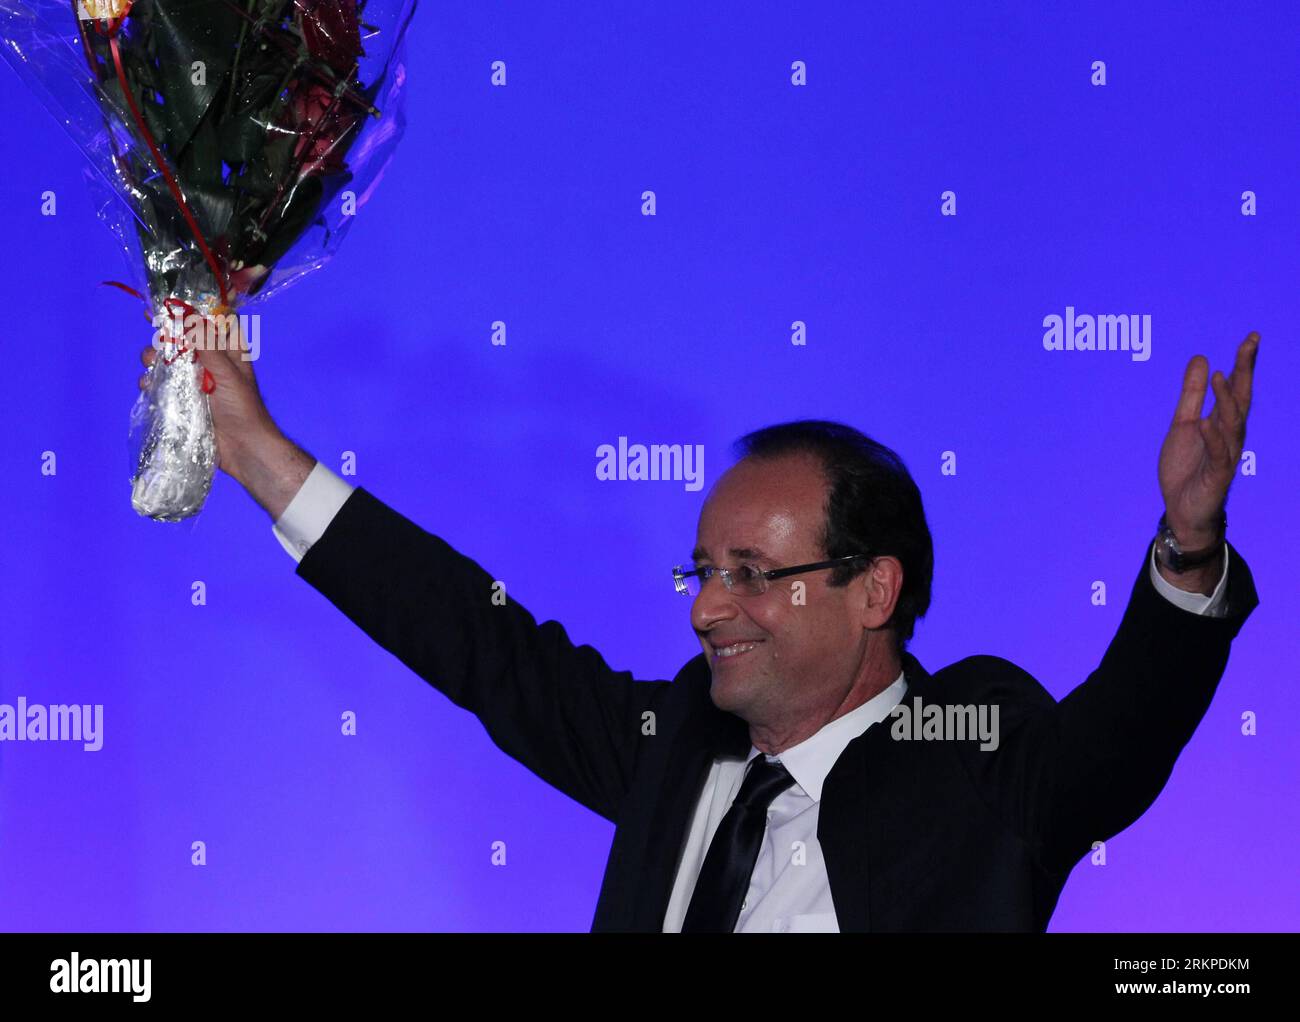 Bildnummer: 57962365  Datum: 06.05.2012  Copyright: imago/Xinhua (120506) -- TULLE, May 6, 2012 (Xinhua) -- France s Socialist Party s candidate Francois Hollande gestures to his supporters during a rally after he defeated incumbent French President Nicolas Sarkozy in Sunday s decisive presidential runoff, in Tulle, southern France, May 6, 2012. Francois Hollande said he feels proud of bringing hope to France and that change will start from now in an address to his supporters on Sunday night after the presidential election. (Xinhua/Gao Jing) (zx) FRANCE-TULLE-HOLLANDE-VICTORY PUBLICATIONxNOTxI Stock Photo